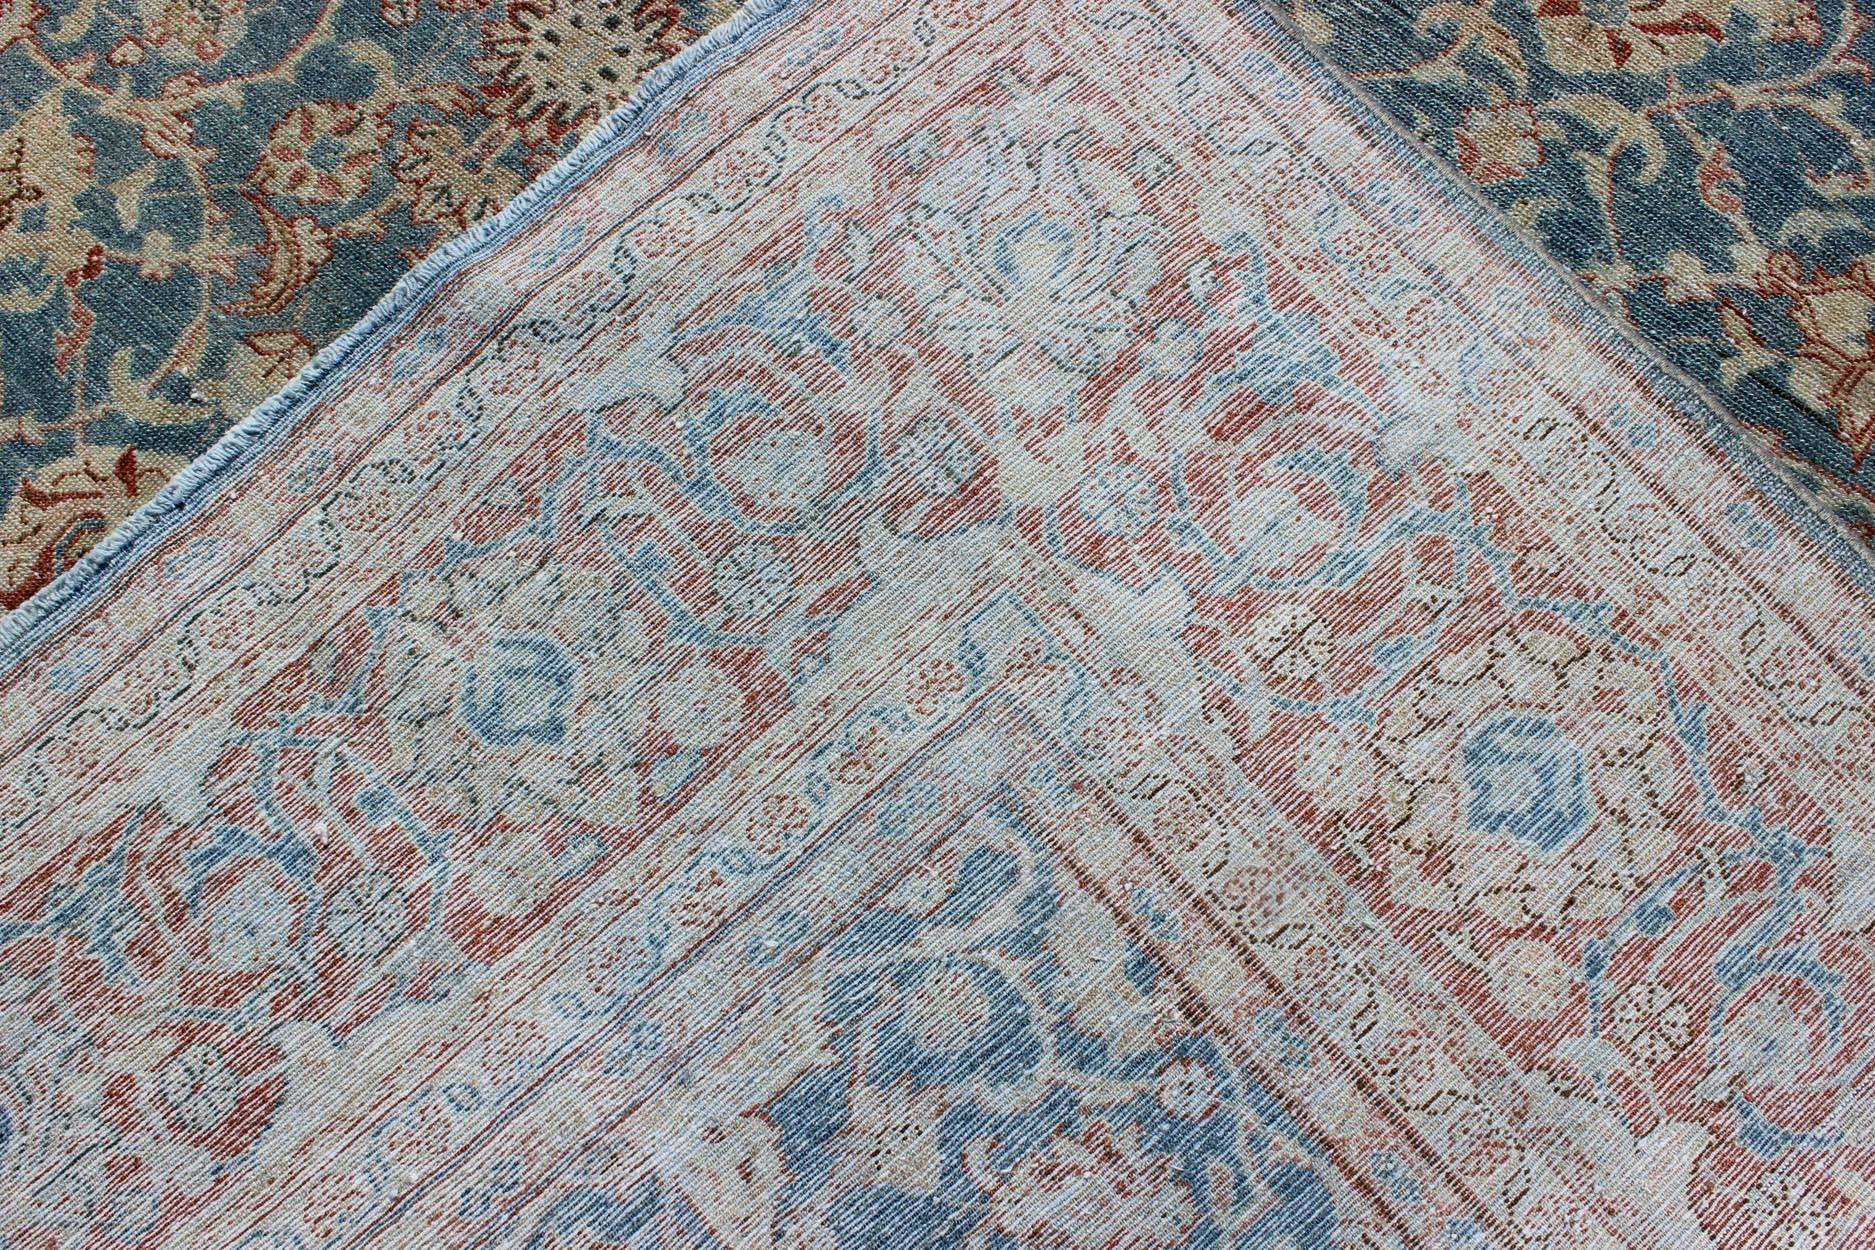 Blue and Red Antique Persian Malayer Rug with All-Over Design and Ornate Borders For Sale 1